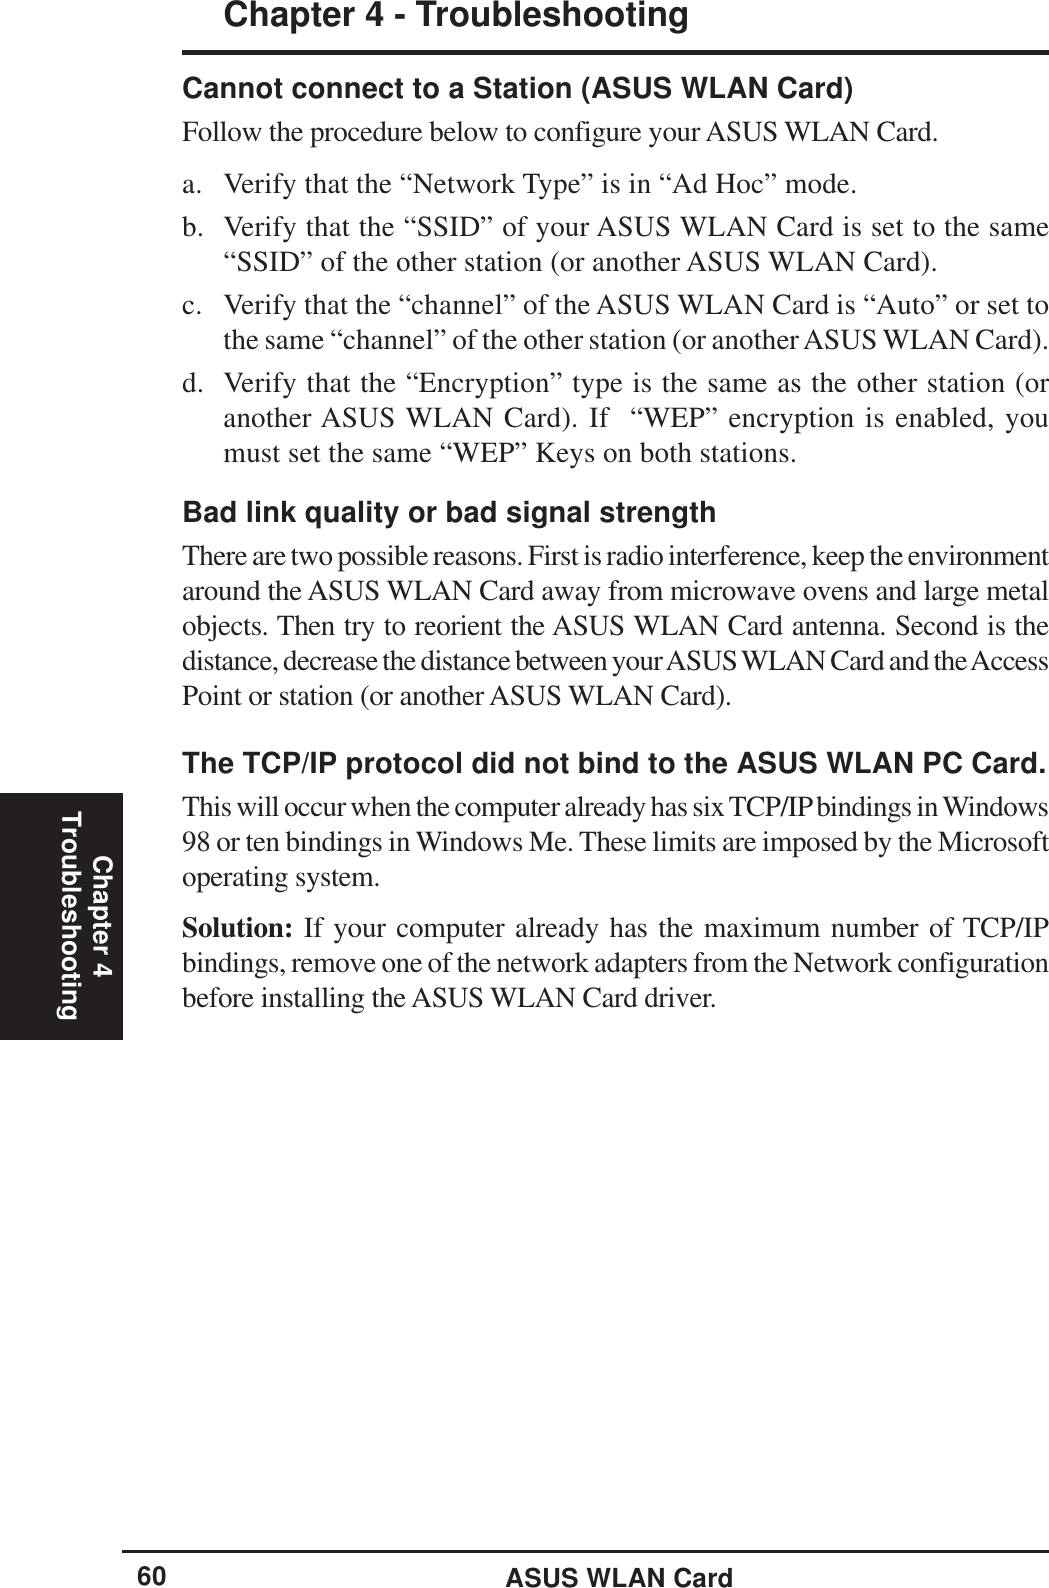 ASUS WLAN CardChapter 4 - TroubleshootingChapter 4Troubleshooting60Cannot connect to a Station (ASUS WLAN Card)Follow the procedure below to configure your ASUS WLAN Card.a. Verify that the “Network Type” is in “Ad Hoc” mode.b. Verify that the “SSID” of your ASUS WLAN Card is set to the same“SSID” of the other station (or another ASUS WLAN Card).c. Verify that the “channel” of the ASUS WLAN Card is “Auto” or set tothe same “channel” of the other station (or another ASUS WLAN Card).d. Verify that the “Encryption” type is the same as the other station (oranother ASUS WLAN Card). If  “WEP” encryption is enabled, youmust set the same “WEP” Keys on both stations.Bad link quality or bad signal strengthThere are two possible reasons. First is radio interference, keep the environmentaround the ASUS WLAN Card away from microwave ovens and large metalobjects. Then try to reorient the ASUS WLAN Card antenna. Second is thedistance, decrease the distance between your ASUS WLAN Card and the AccessPoint or station (or another ASUS WLAN Card).The TCP/IP protocol did not bind to the ASUS WLAN PC Card.This will occur when the computer already has six TCP/IP bindings in Windows98 or ten bindings in Windows Me. These limits are imposed by the Microsoftoperating system.Solution: If your computer already has the maximum number of TCP/IPbindings, remove one of the network adapters from the Network configurationbefore installing the ASUS WLAN Card driver.